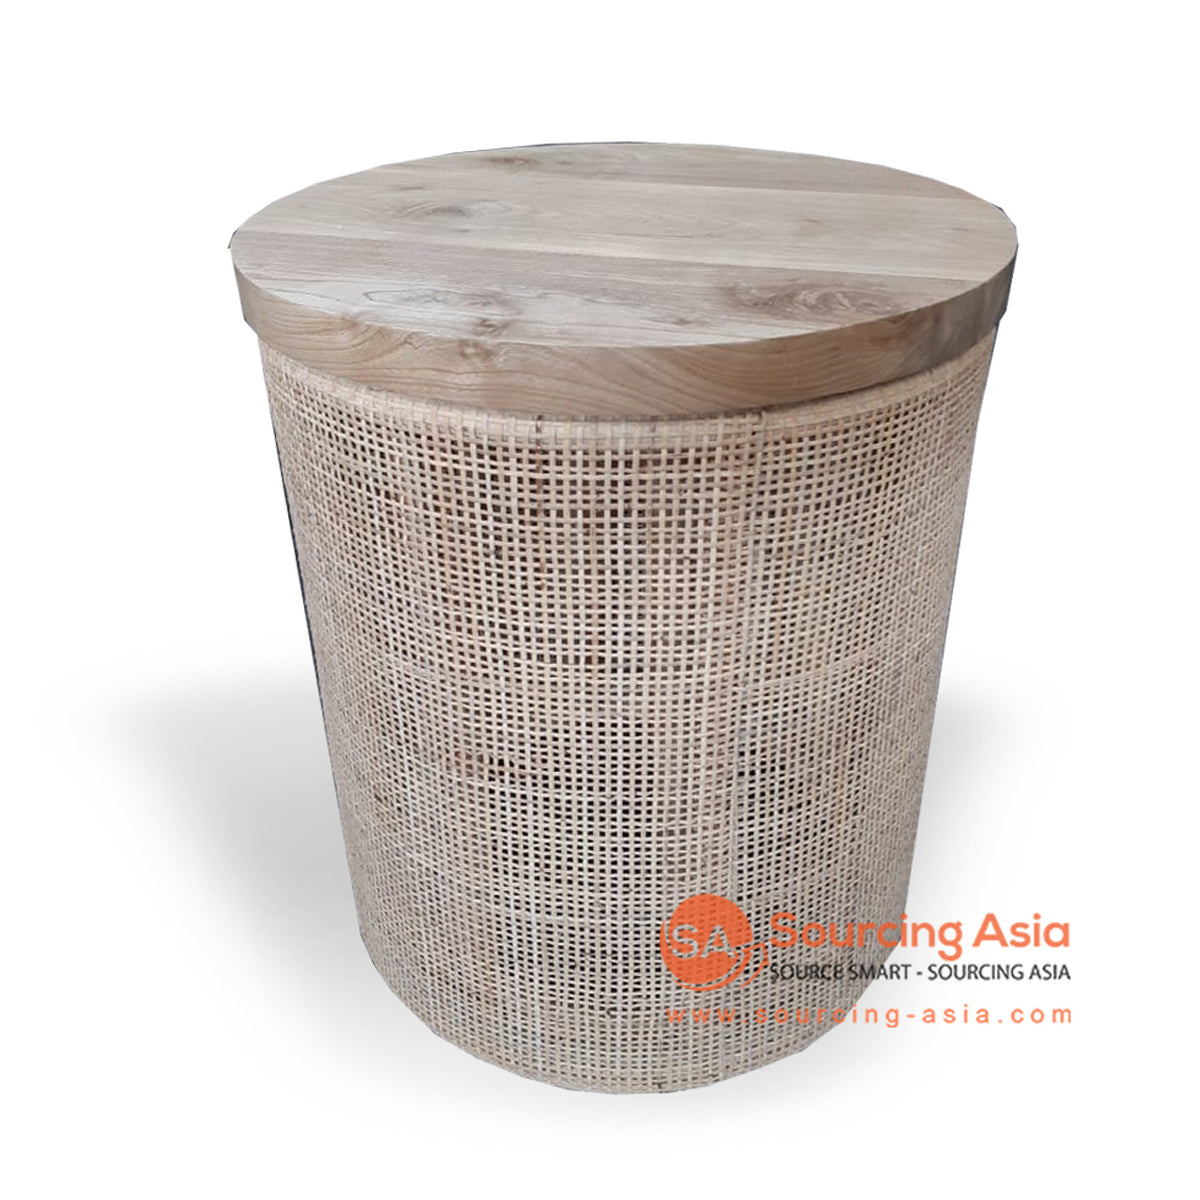 BNT222 NATURAL RATTAN SIDE TABLE WITH TEAK WOOD TOP